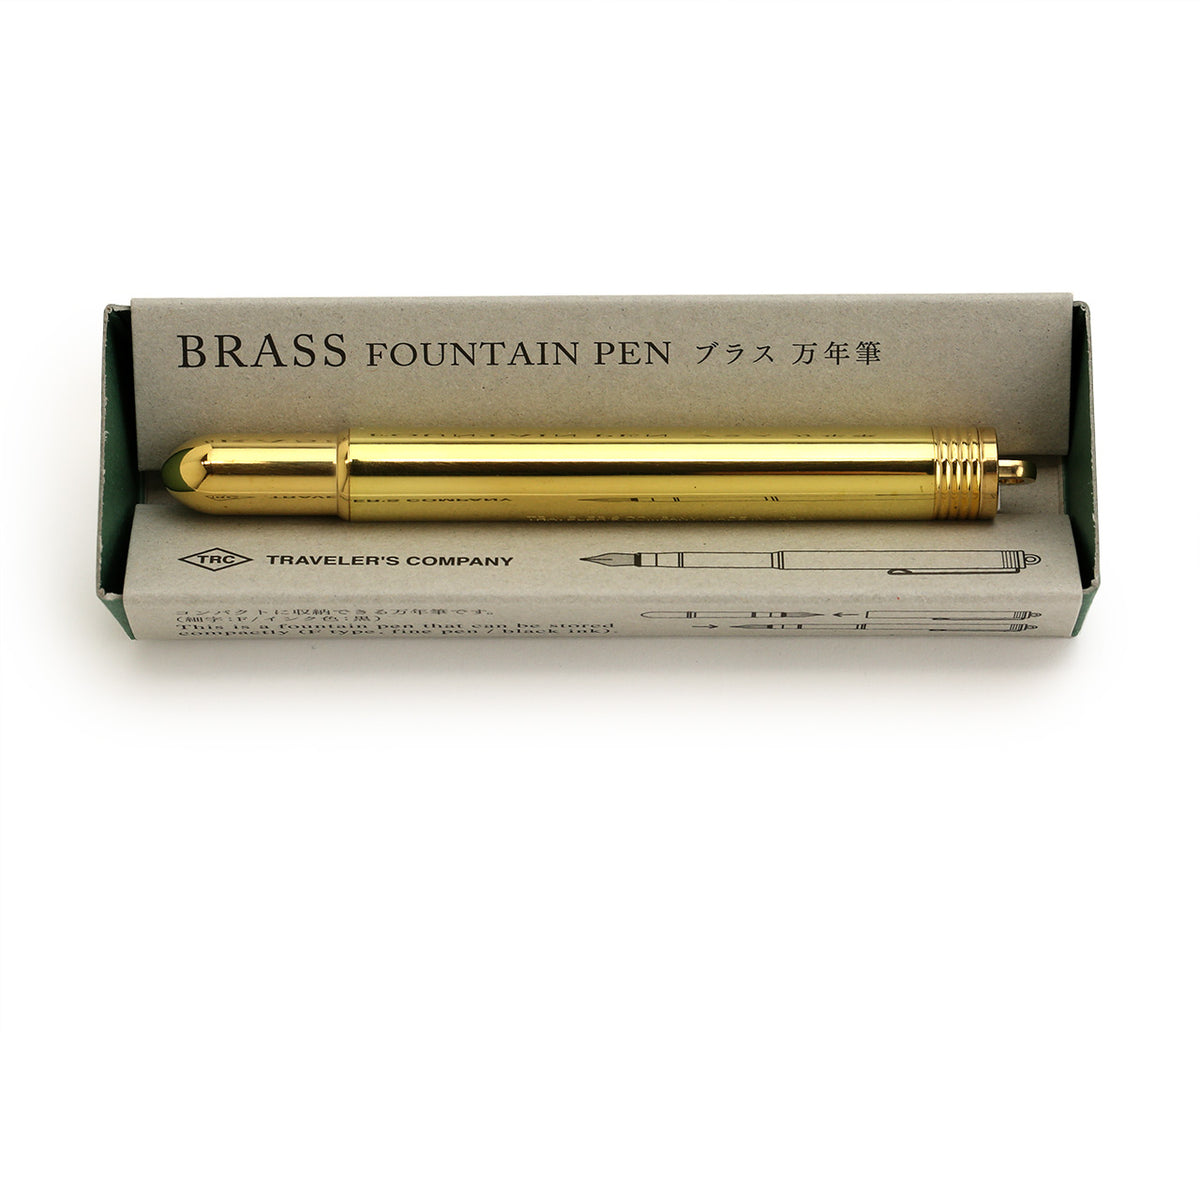 kraft packaging for the brass fountain pen from Traveler&#39;s company